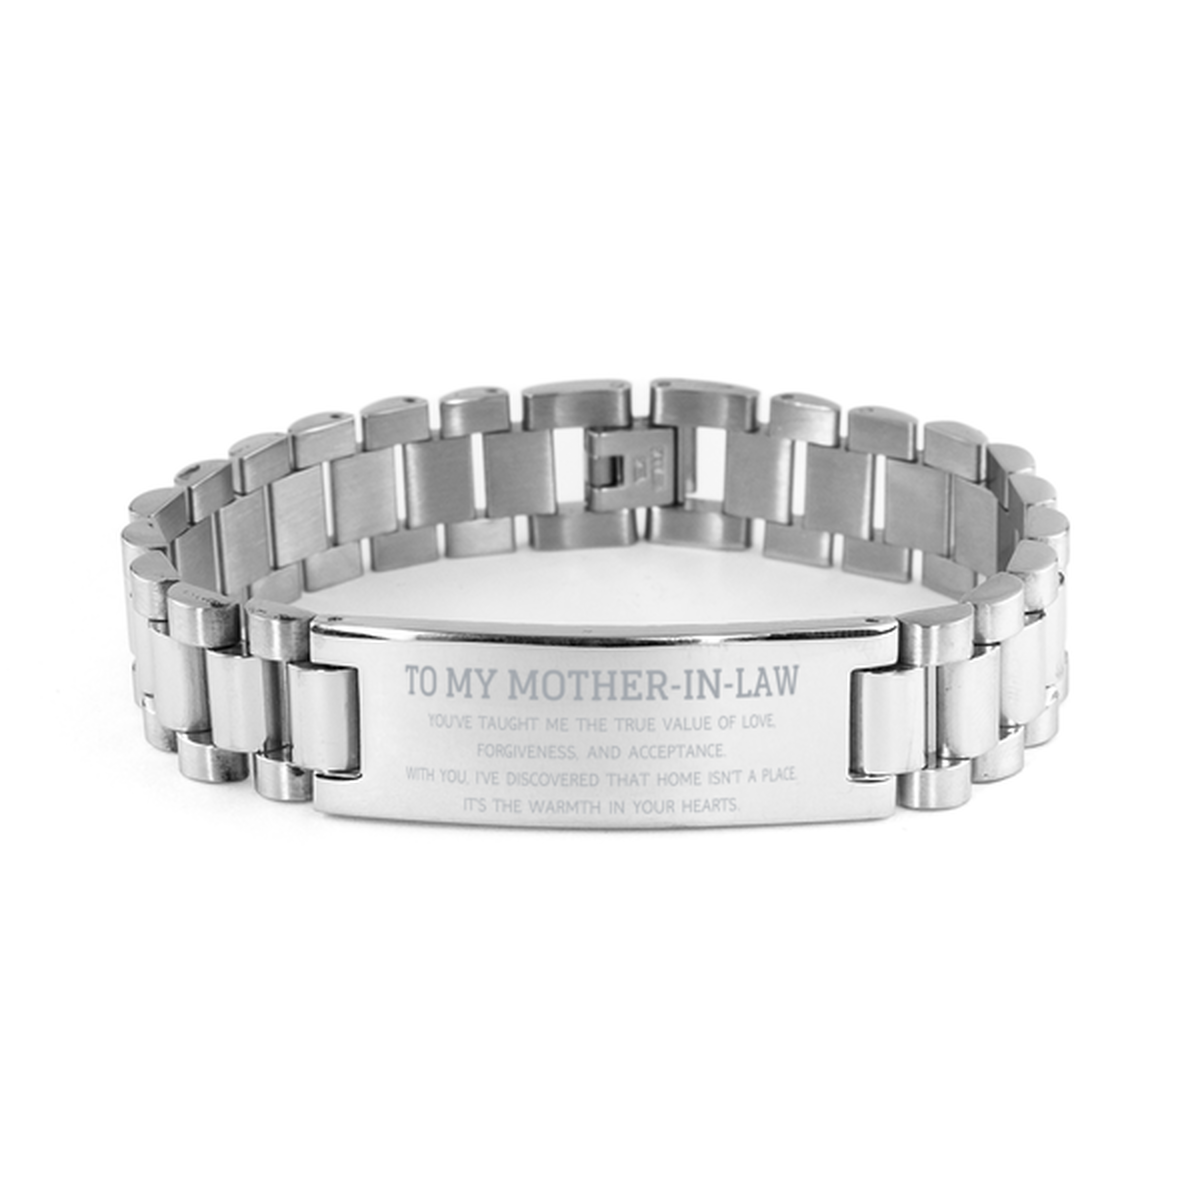 To My Mother-In-Law Gifts, You've taught me the true value of love, Thank You Gifts For Mother-In-Law, Birthday Ladder Stainless Steel Bracelet For Mother-In-Law